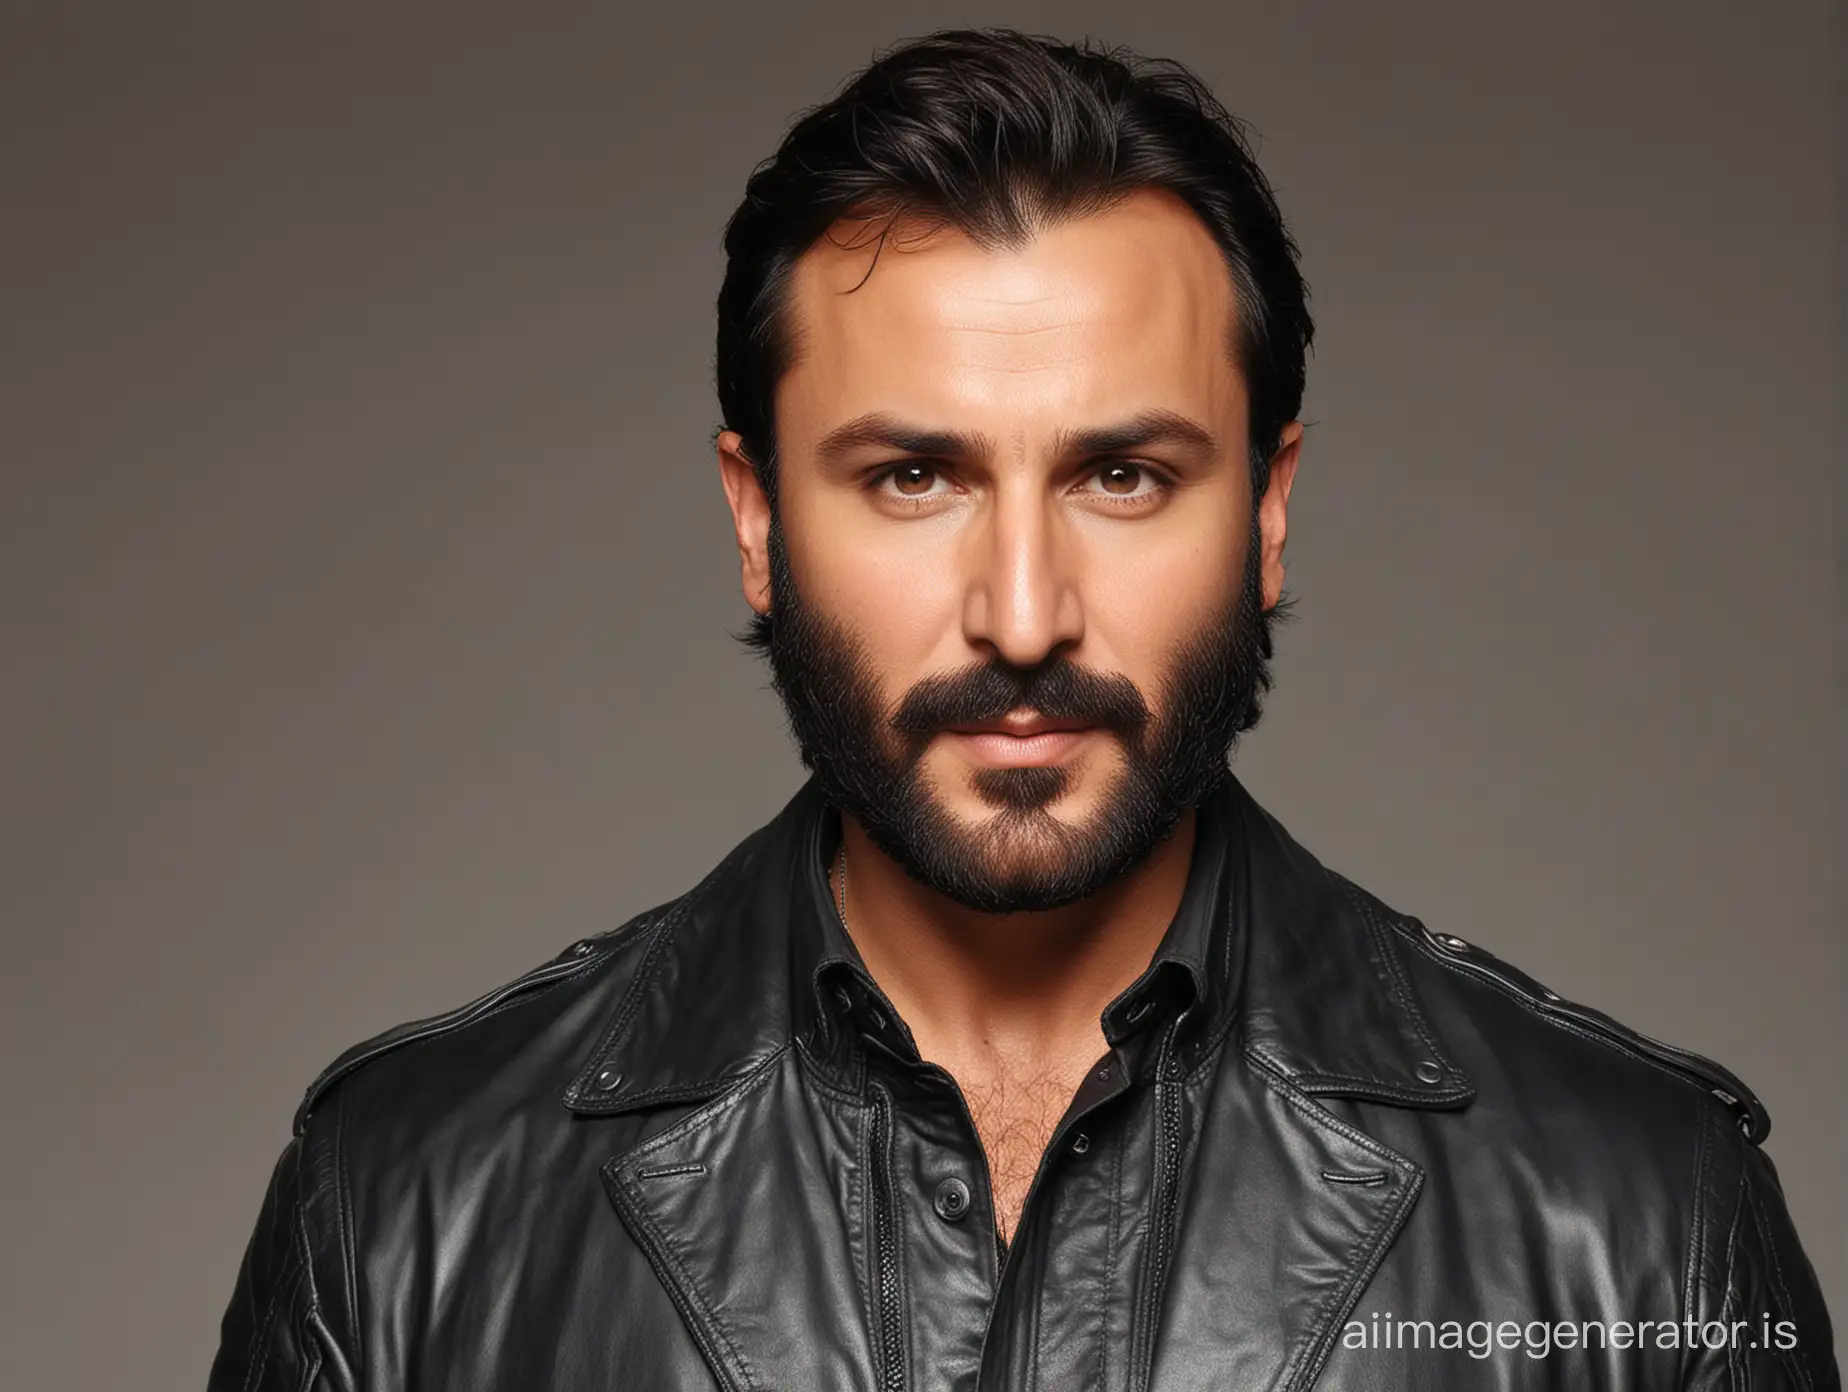 Suave-Saif-Ali-Khan-Stylishly-Relaxed-in-Leather-Jacket-and-Fuller-Beard